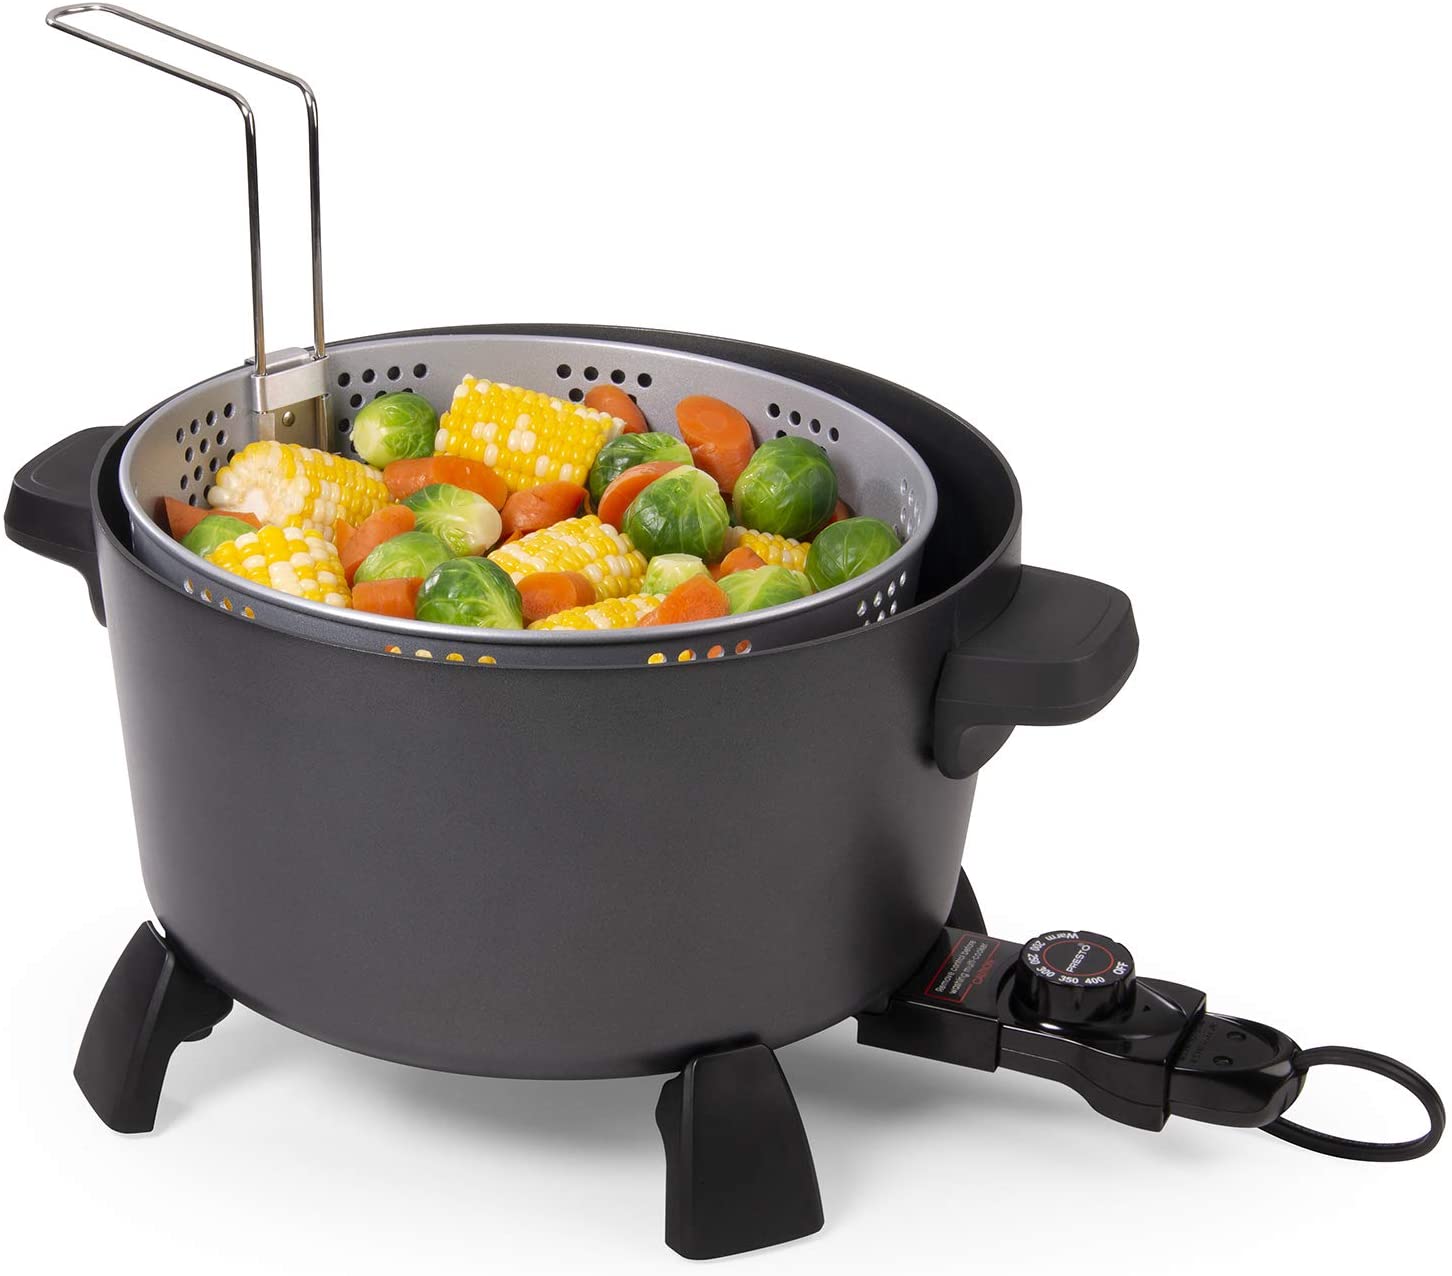 Brentwood 1.3qt Stainless Steel Electric Hot Pot Cooker 